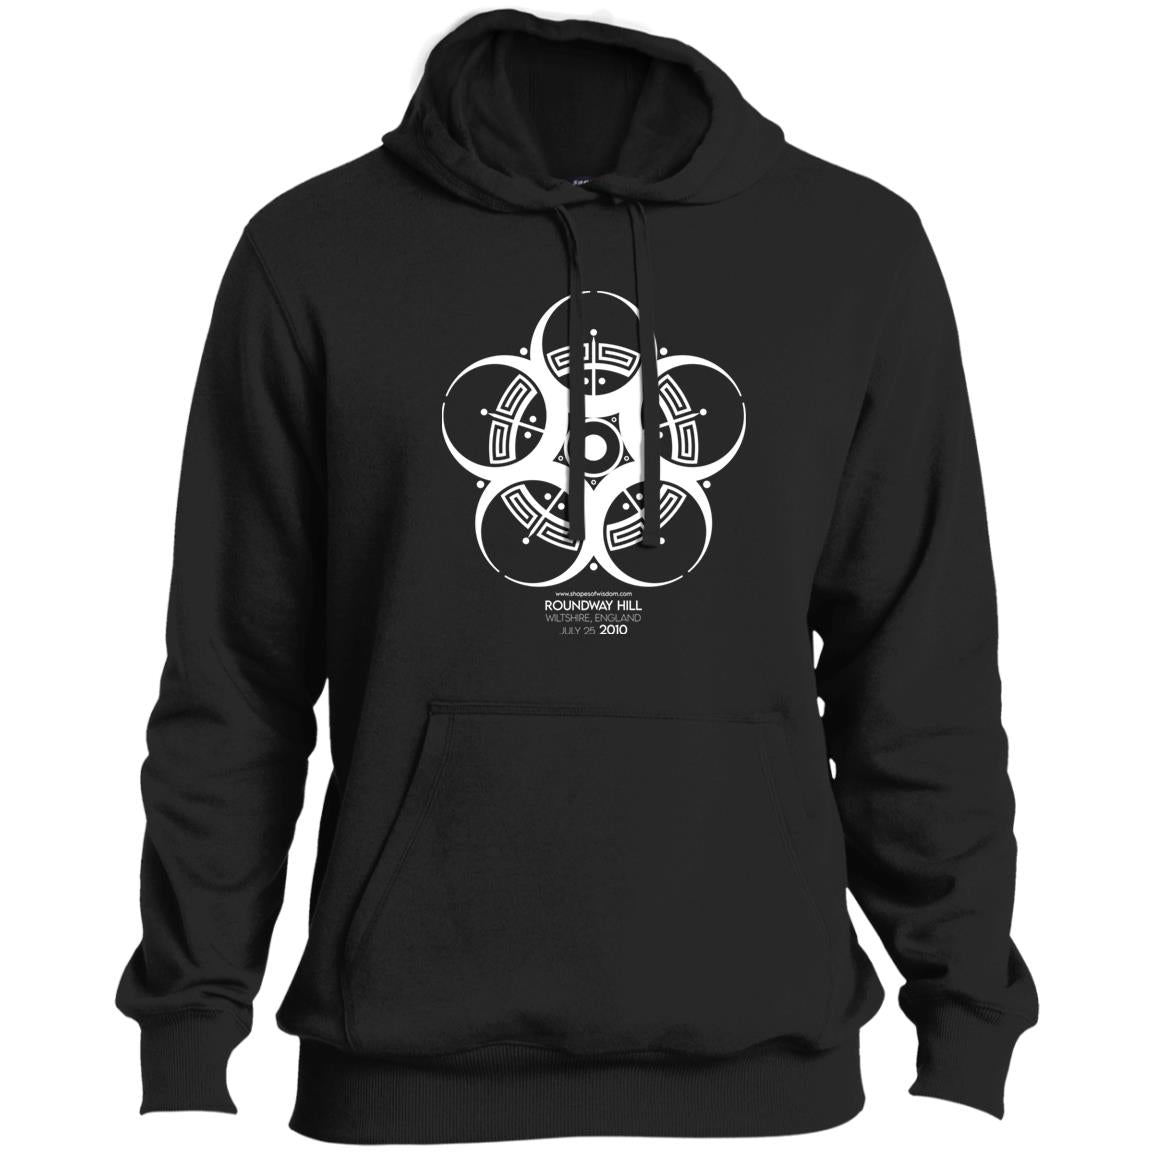 Crop Circle Pullover Hoodie - Roundway Hill 2